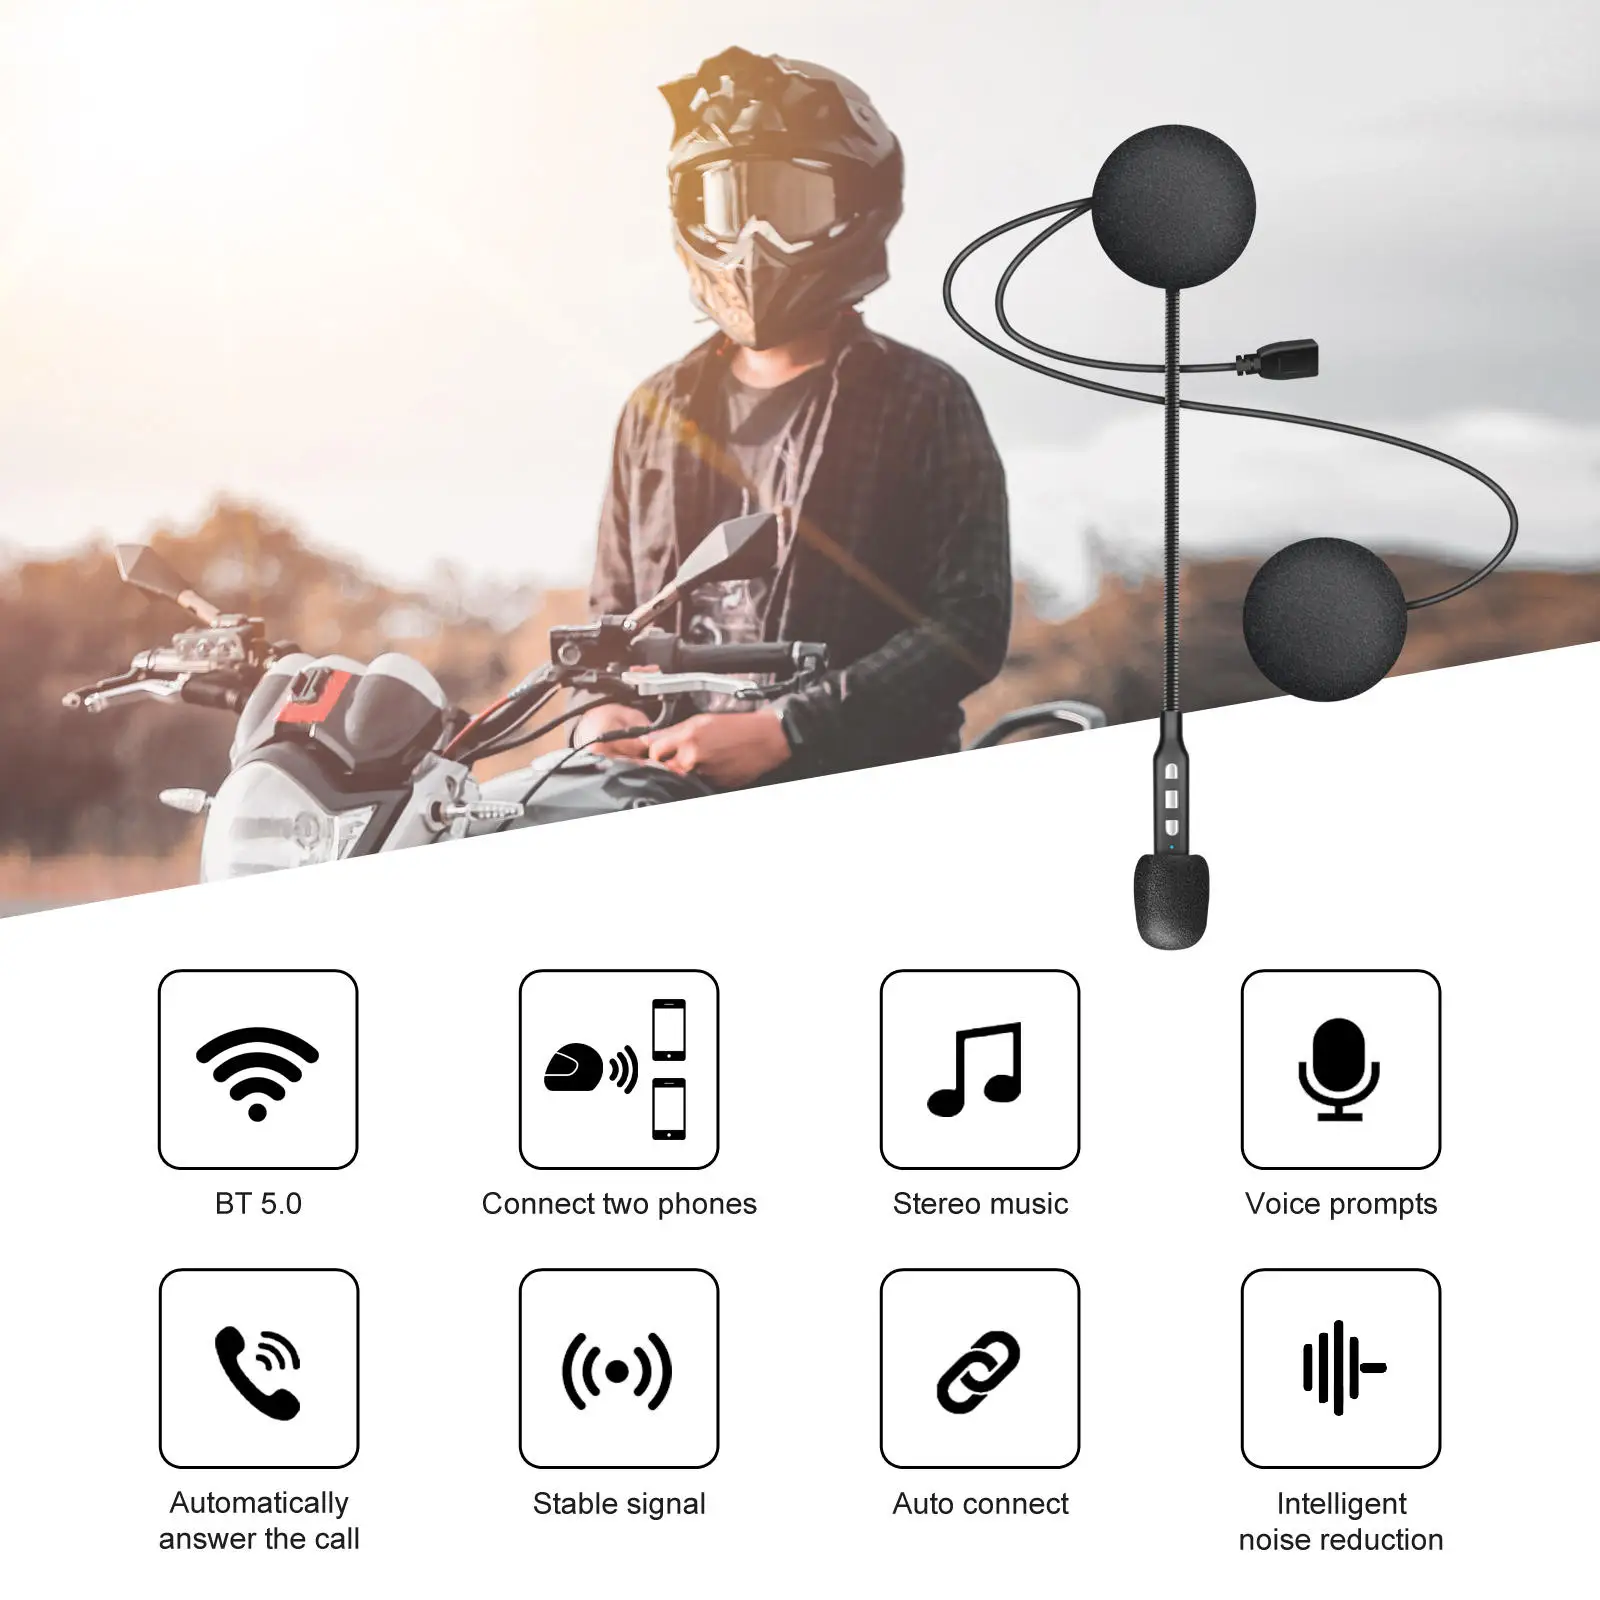 Wireless Motorcycle Helmet Headset Smartphone Anti-Interference Speaker Bluetooth Headphone for Riding Skiing Noise Reduction